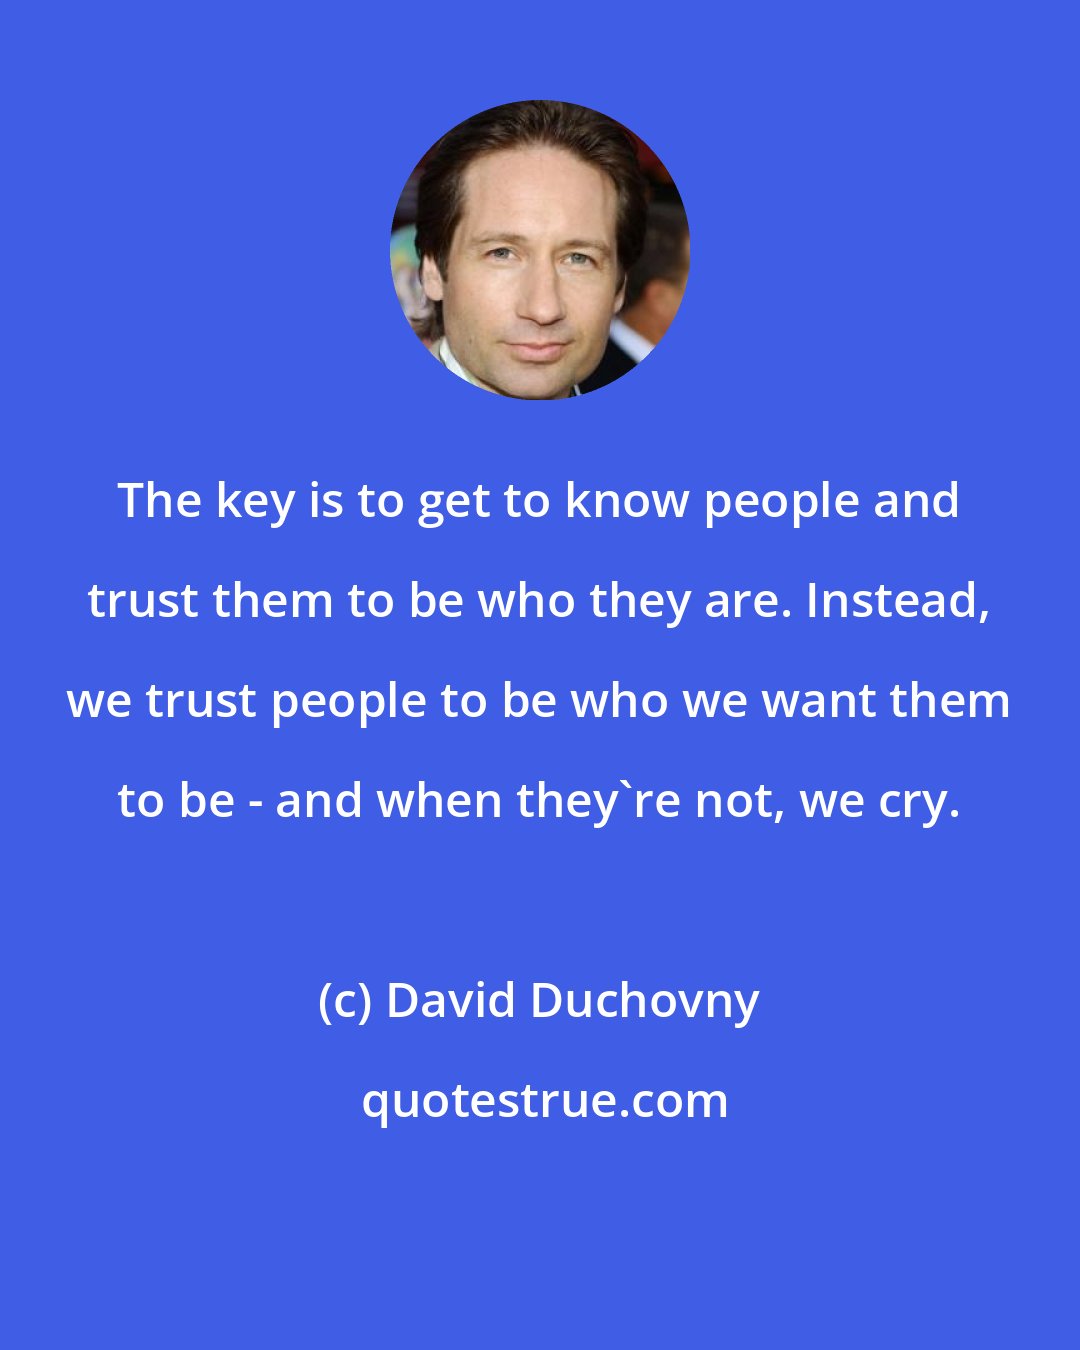 David Duchovny: The key is to get to know people and trust them to be who they are. Instead, we trust people to be who we want them to be - and when they're not, we cry.